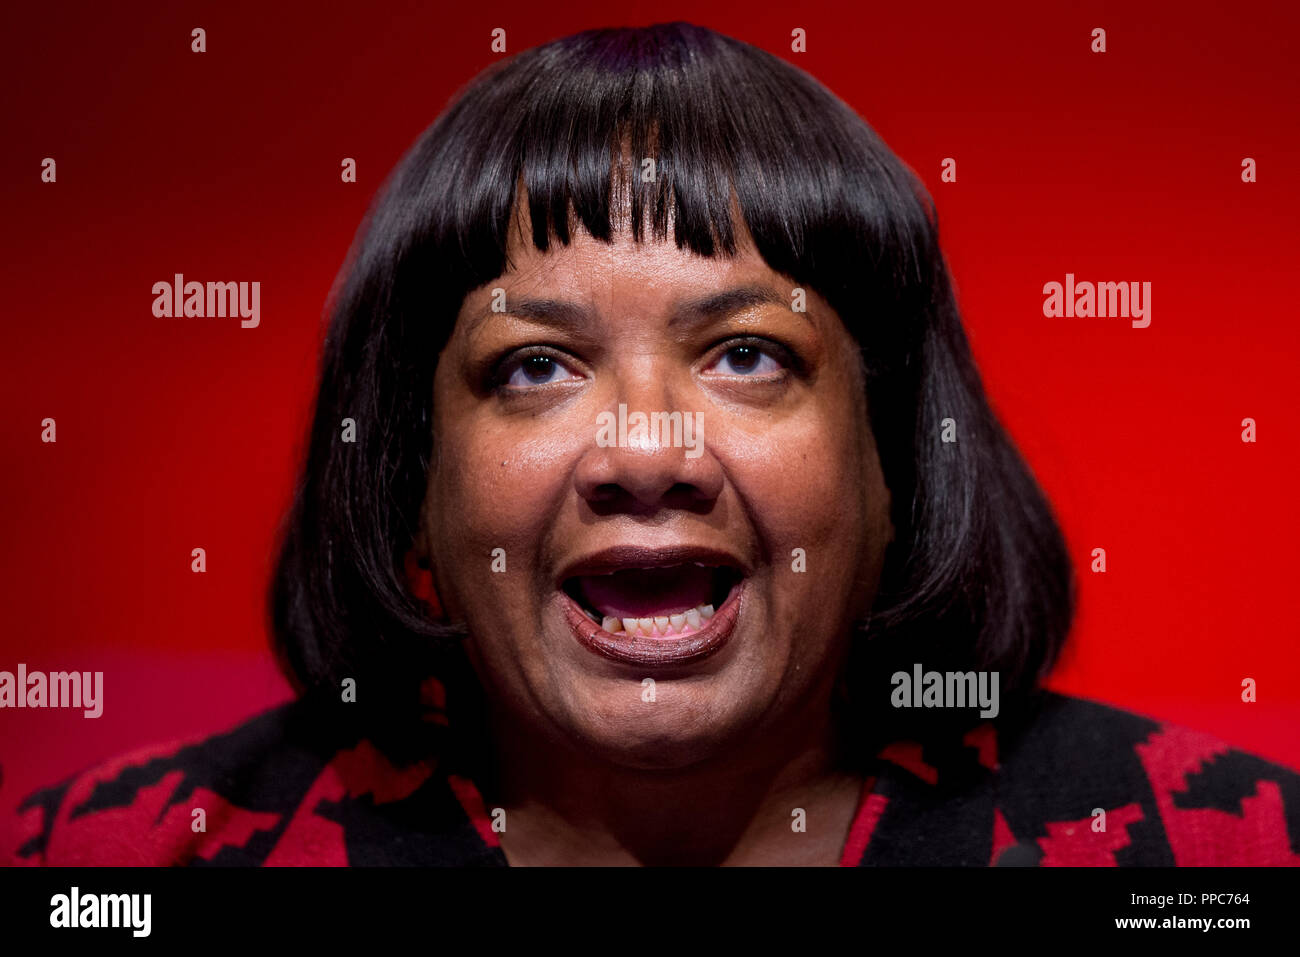 Liverpool, UK. 25th September 2018. Diane Abbott, Shadow Secretary of State for the Home Department and Labour MP for Hackney North and Stoke Newington speaks at the Labour Party Conference in Liverpool. © Russell Hart/Alamy Live News. Stock Photo